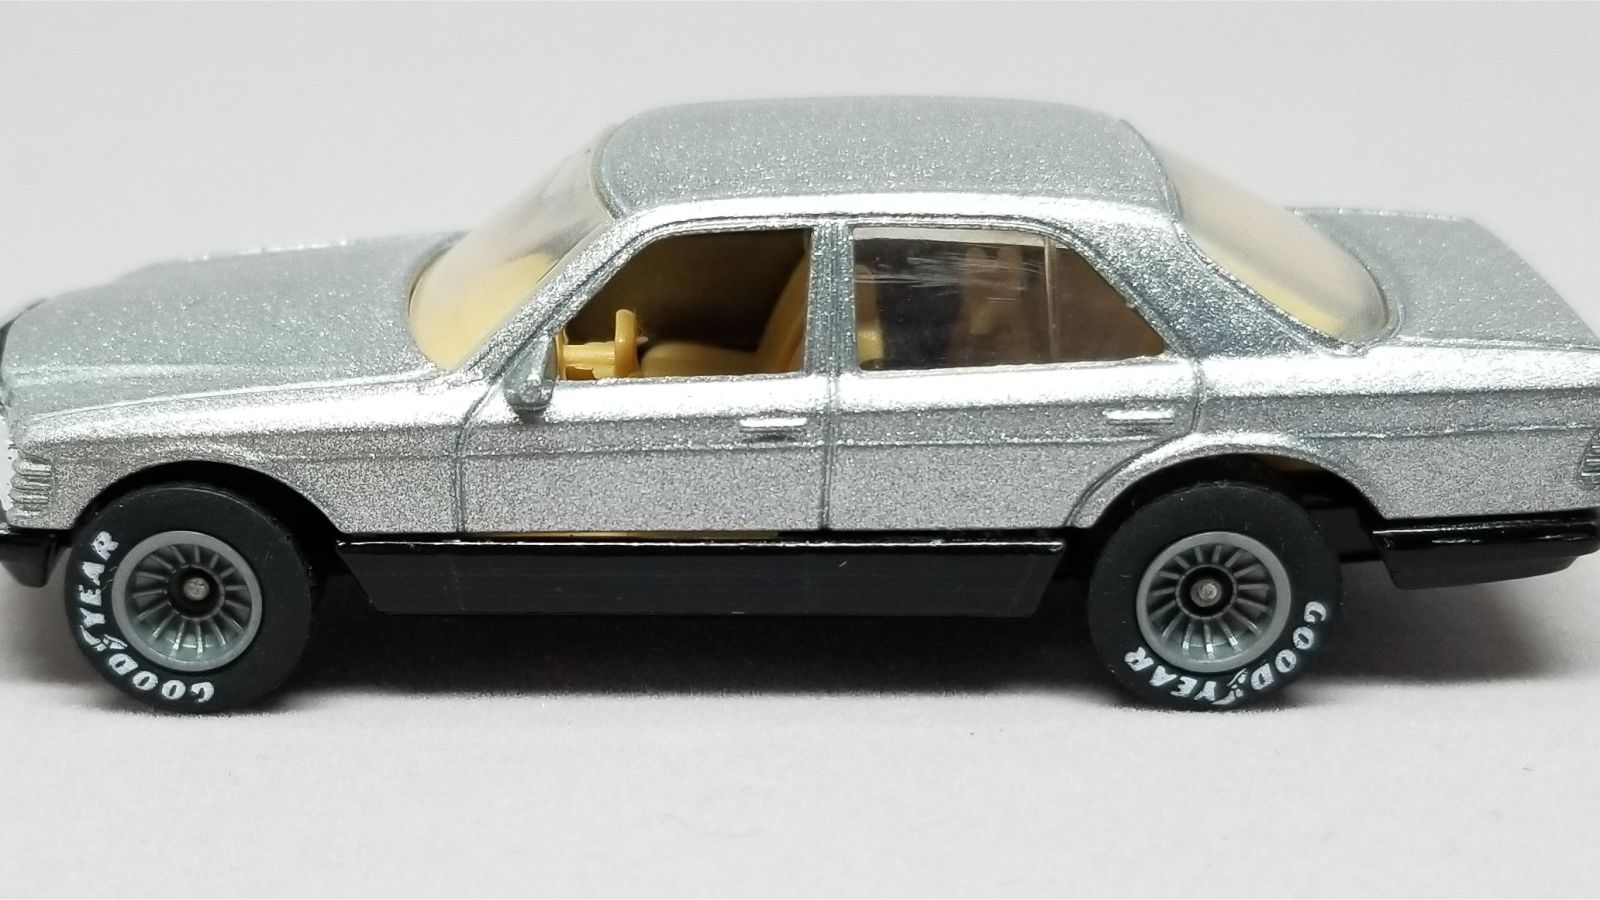 Illustration for article titled [REVIEW] Hot Wheels Mercedes-Benz 380 SEL